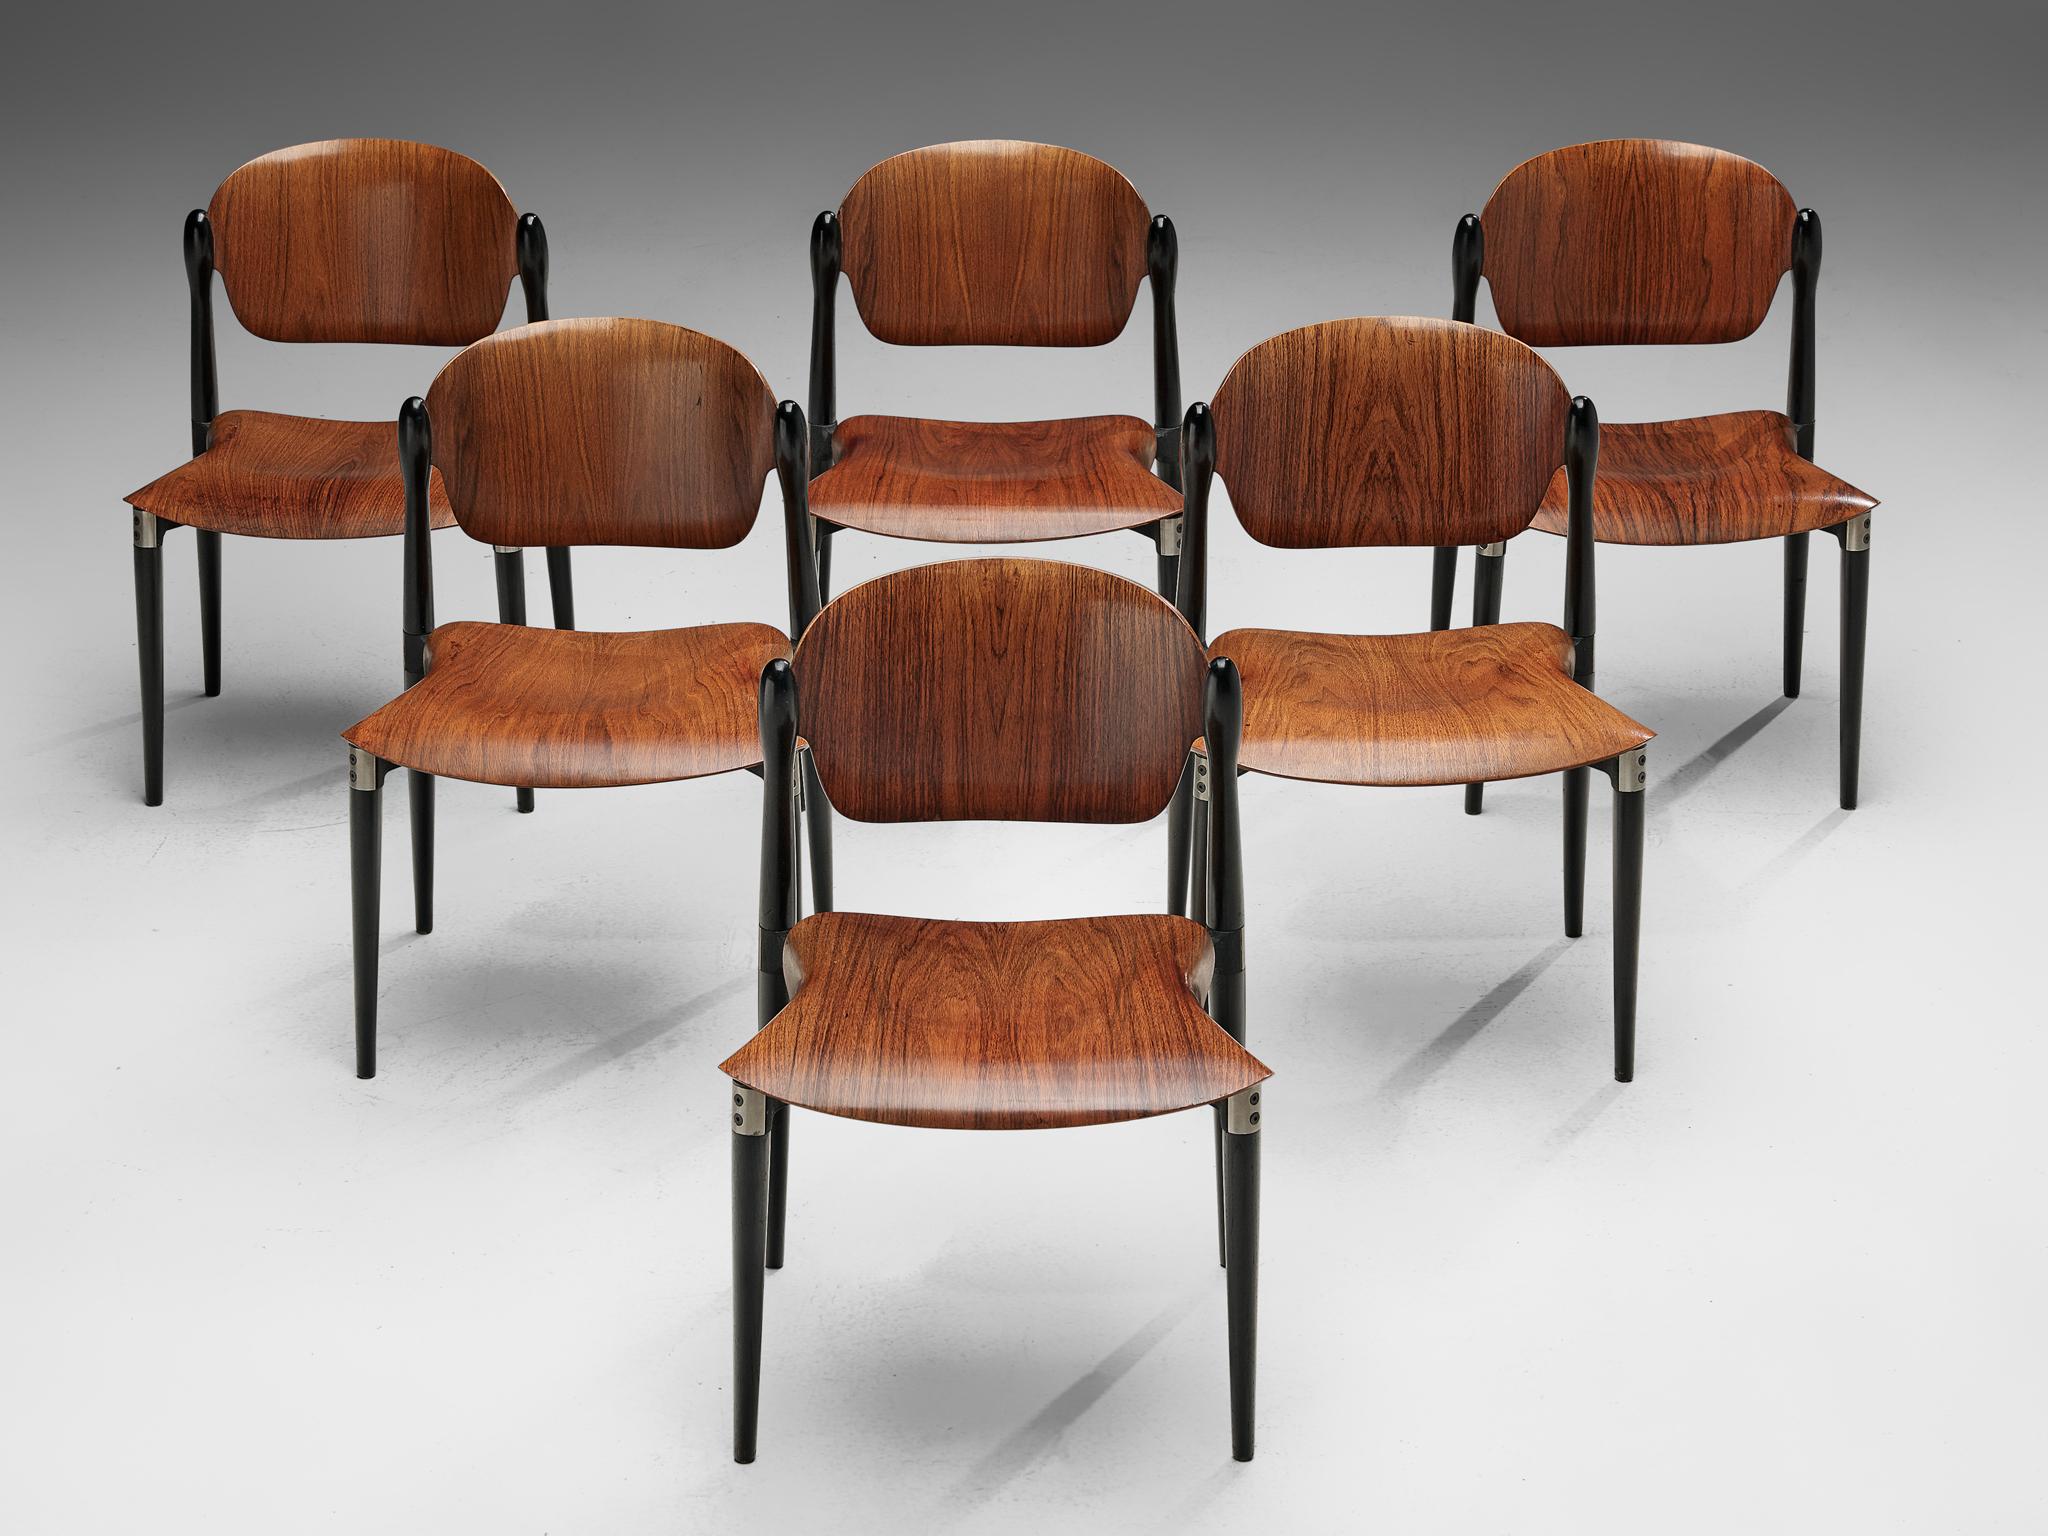 Set of six chairs, in walnut and oak by Eugenio Gerli for Tecno, Italy, 1962. 

Six dining chairs by Italian manufacturer Tecno. These chairs have a beautiful and interesting design. These stackable chairs have a Industrial appearance, yet at the